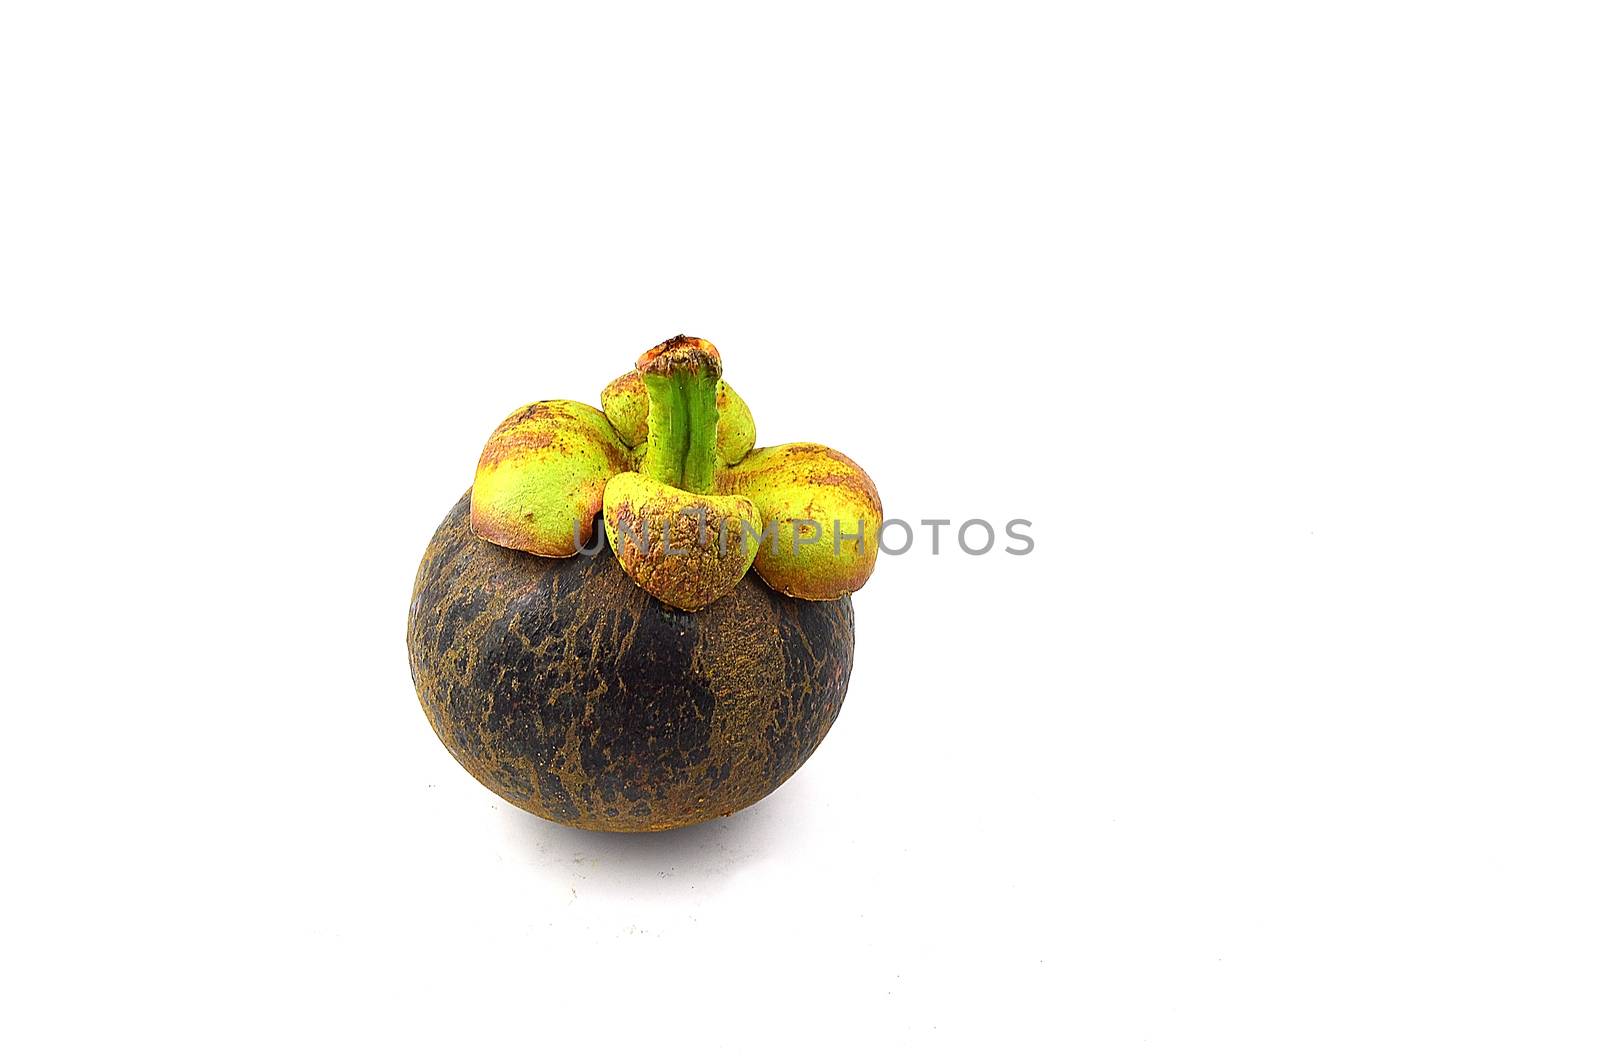 mangosteen fruit and cross section showing the thick purple skin and white flesh of the queen of fruits.